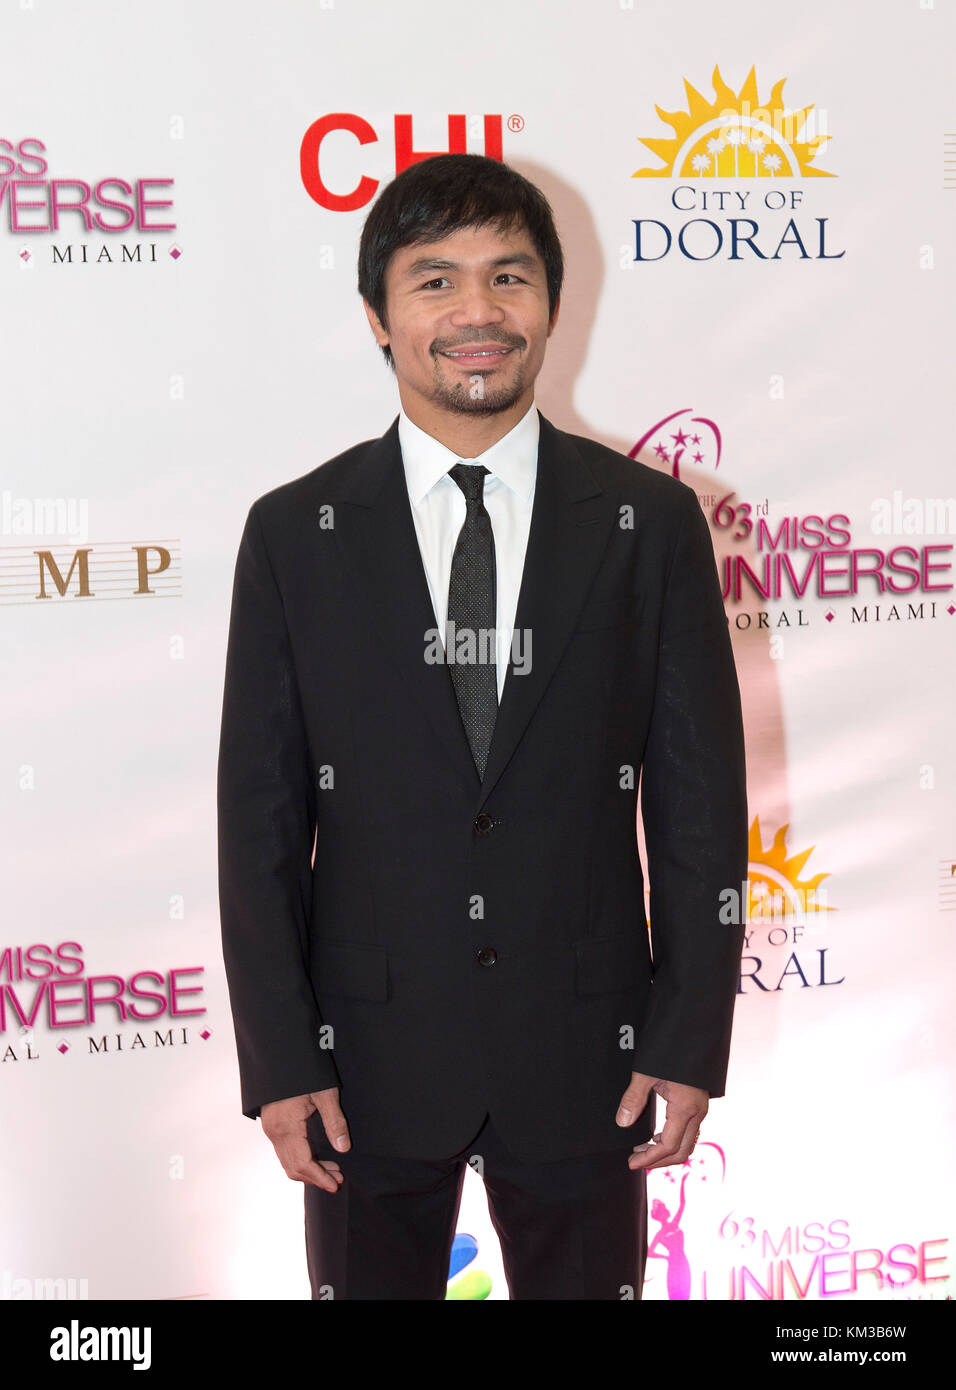 DORAL, FL - JANUARY 25:  Manny Pacquiao attends The 63rd Annual Miss Universe Pageant at Trump National Doral on January 25, 2015 in Doral, Florida.  People:  Manny Pacquiao Stock Photo